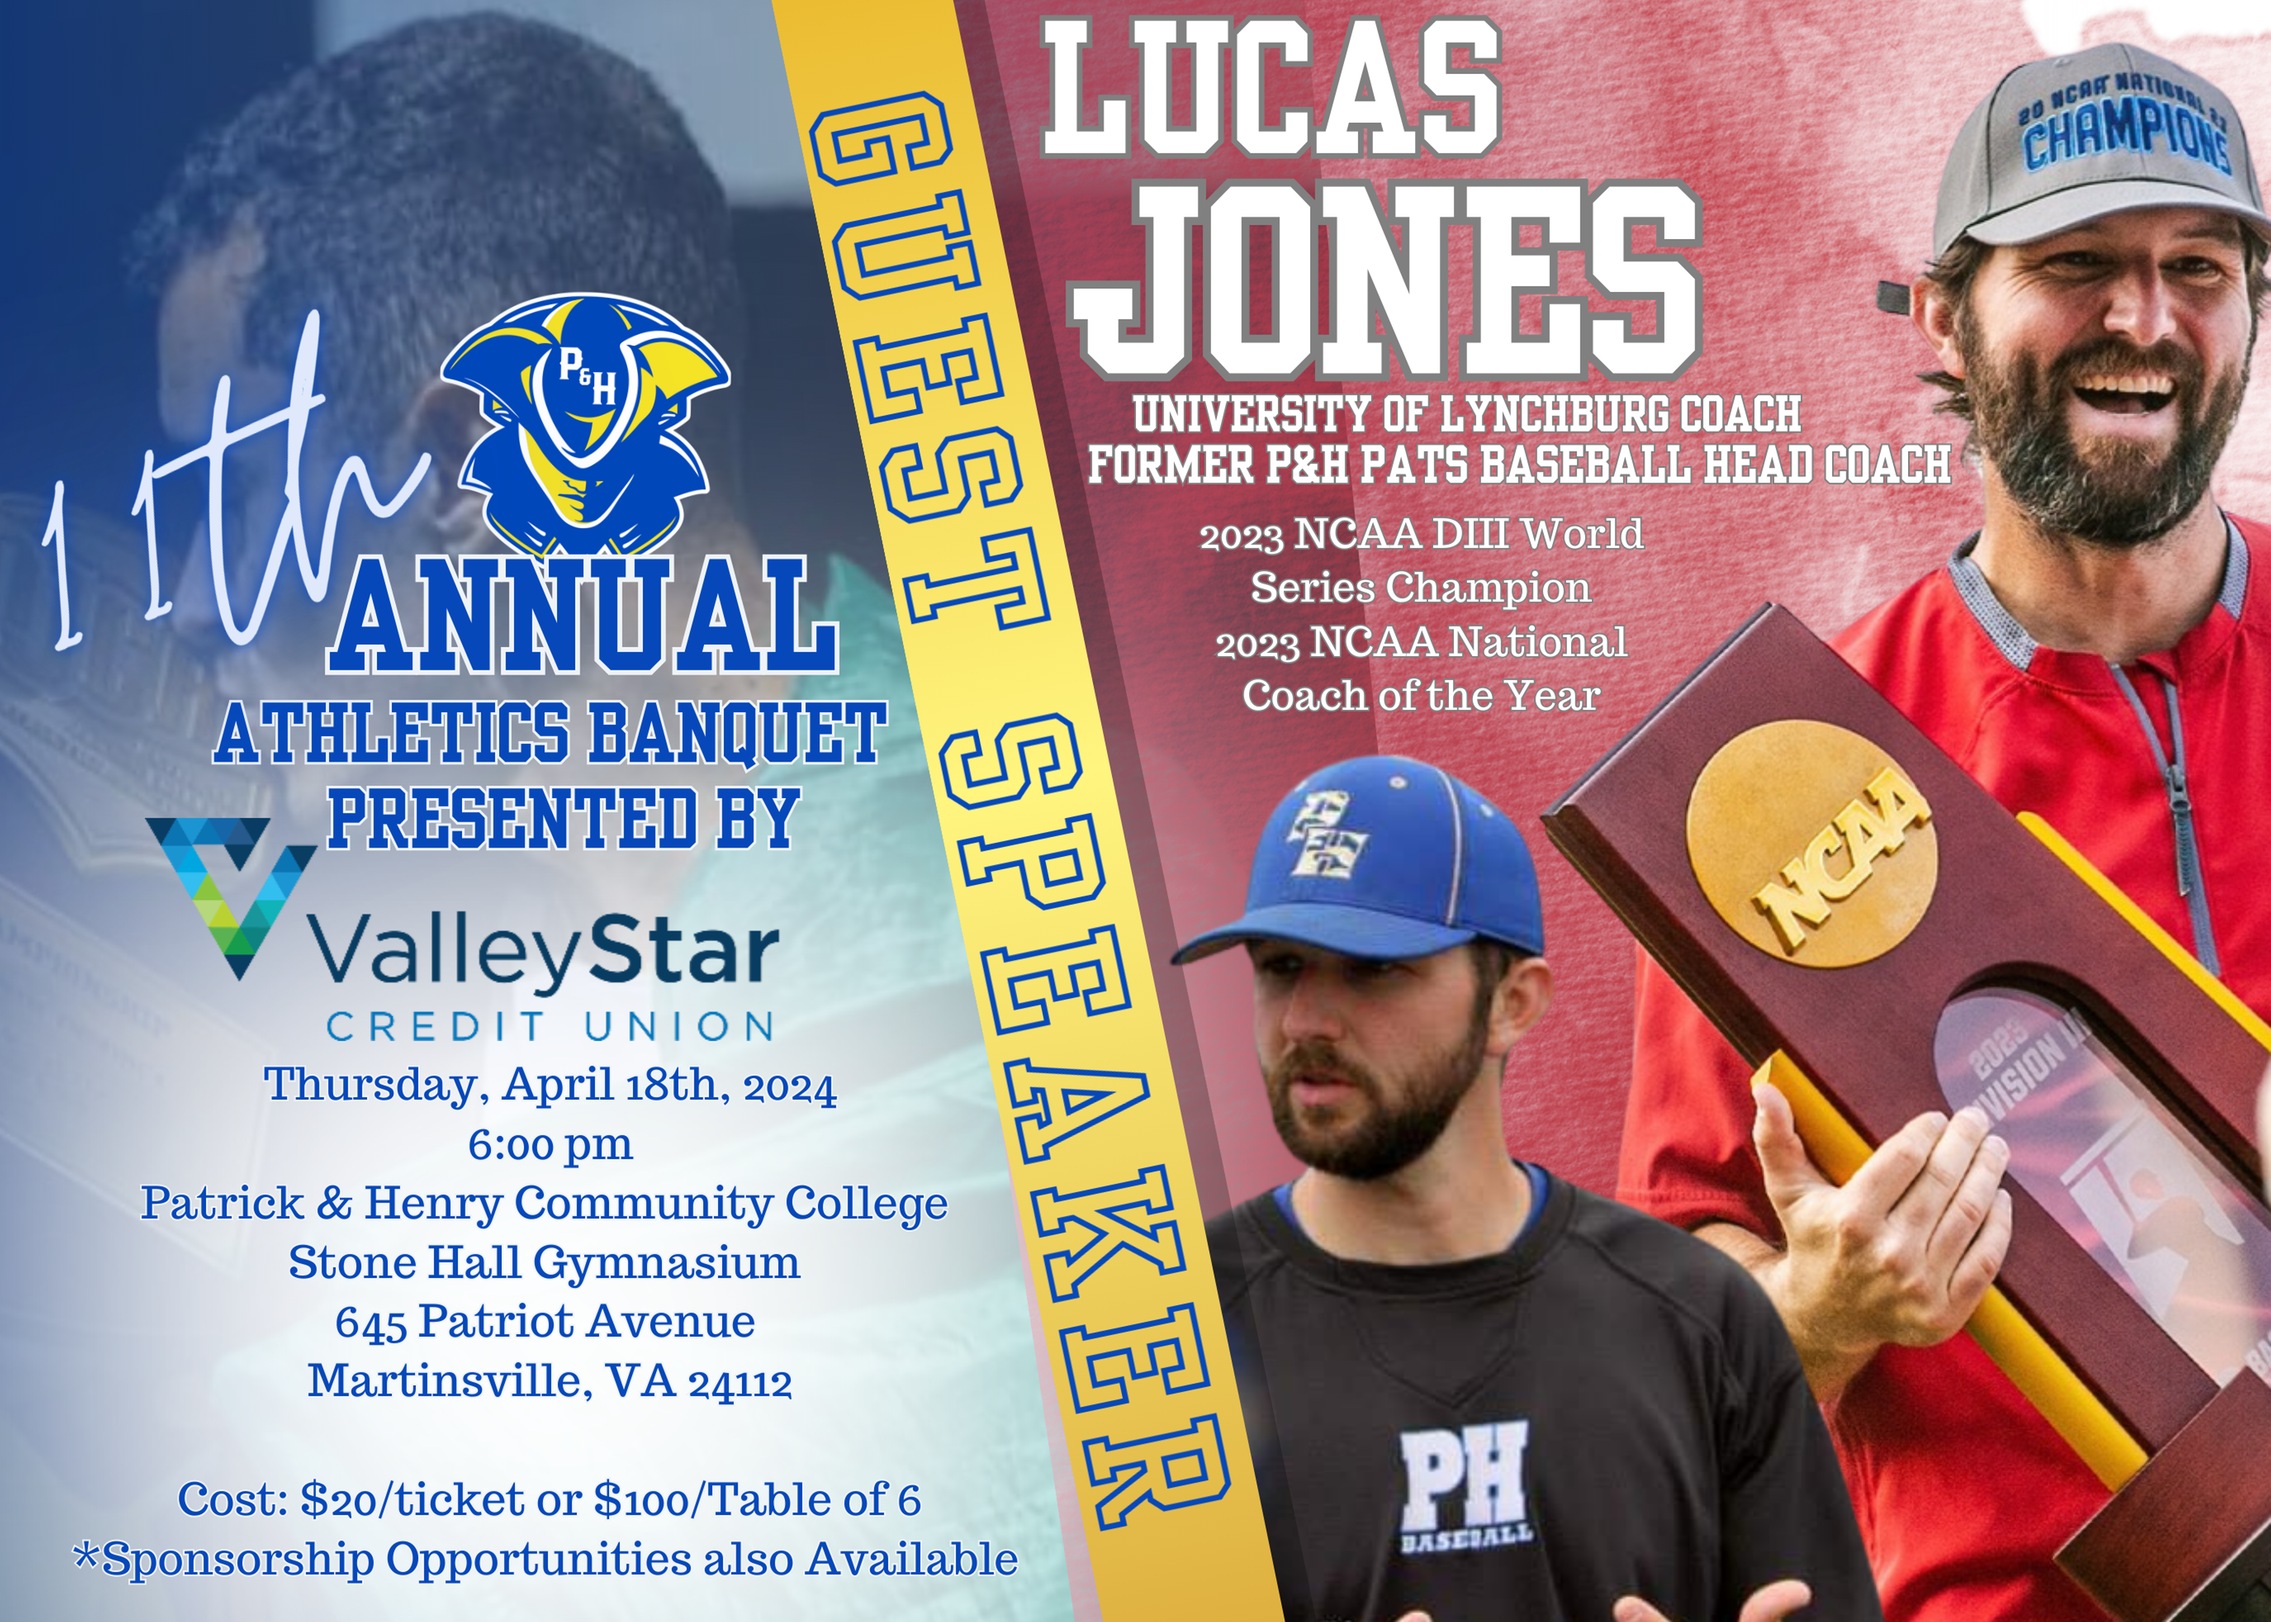 ValleyStar Credit Union Announced as Presenting Sponsor for 11th Annual P&HCC Athletics Banquet